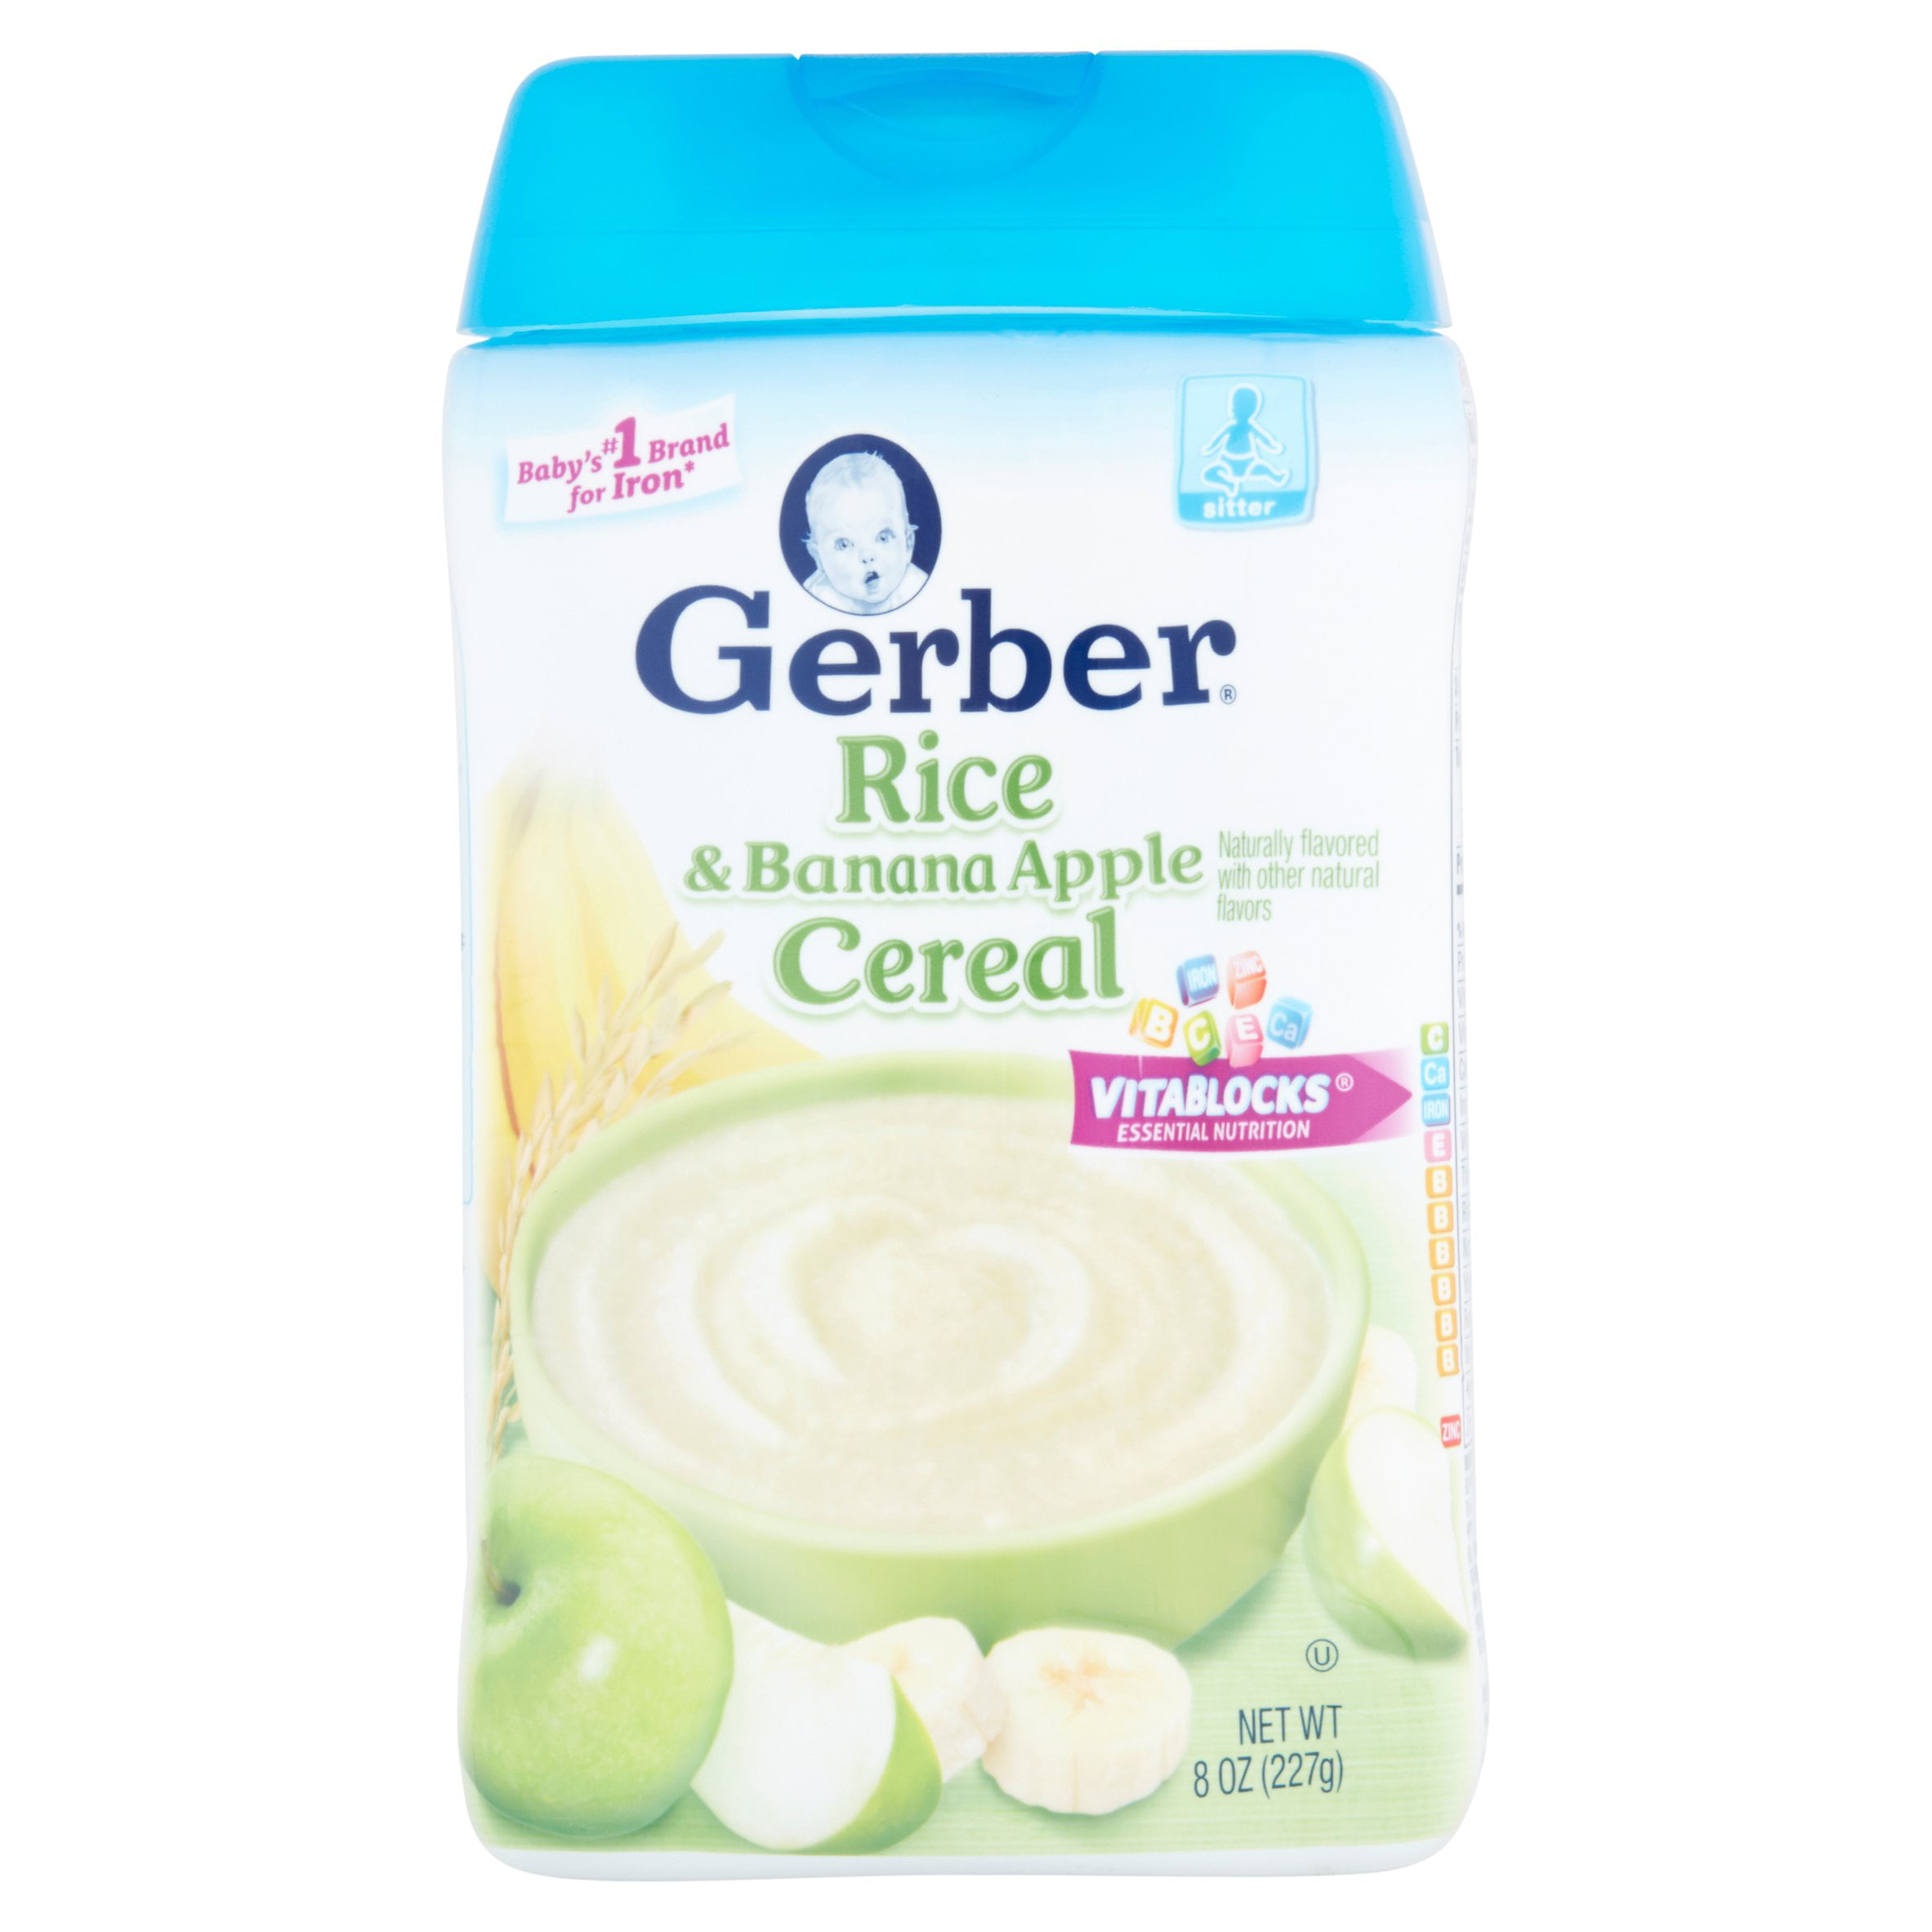 Gerber Rice and Banana Apple Baby Cereal